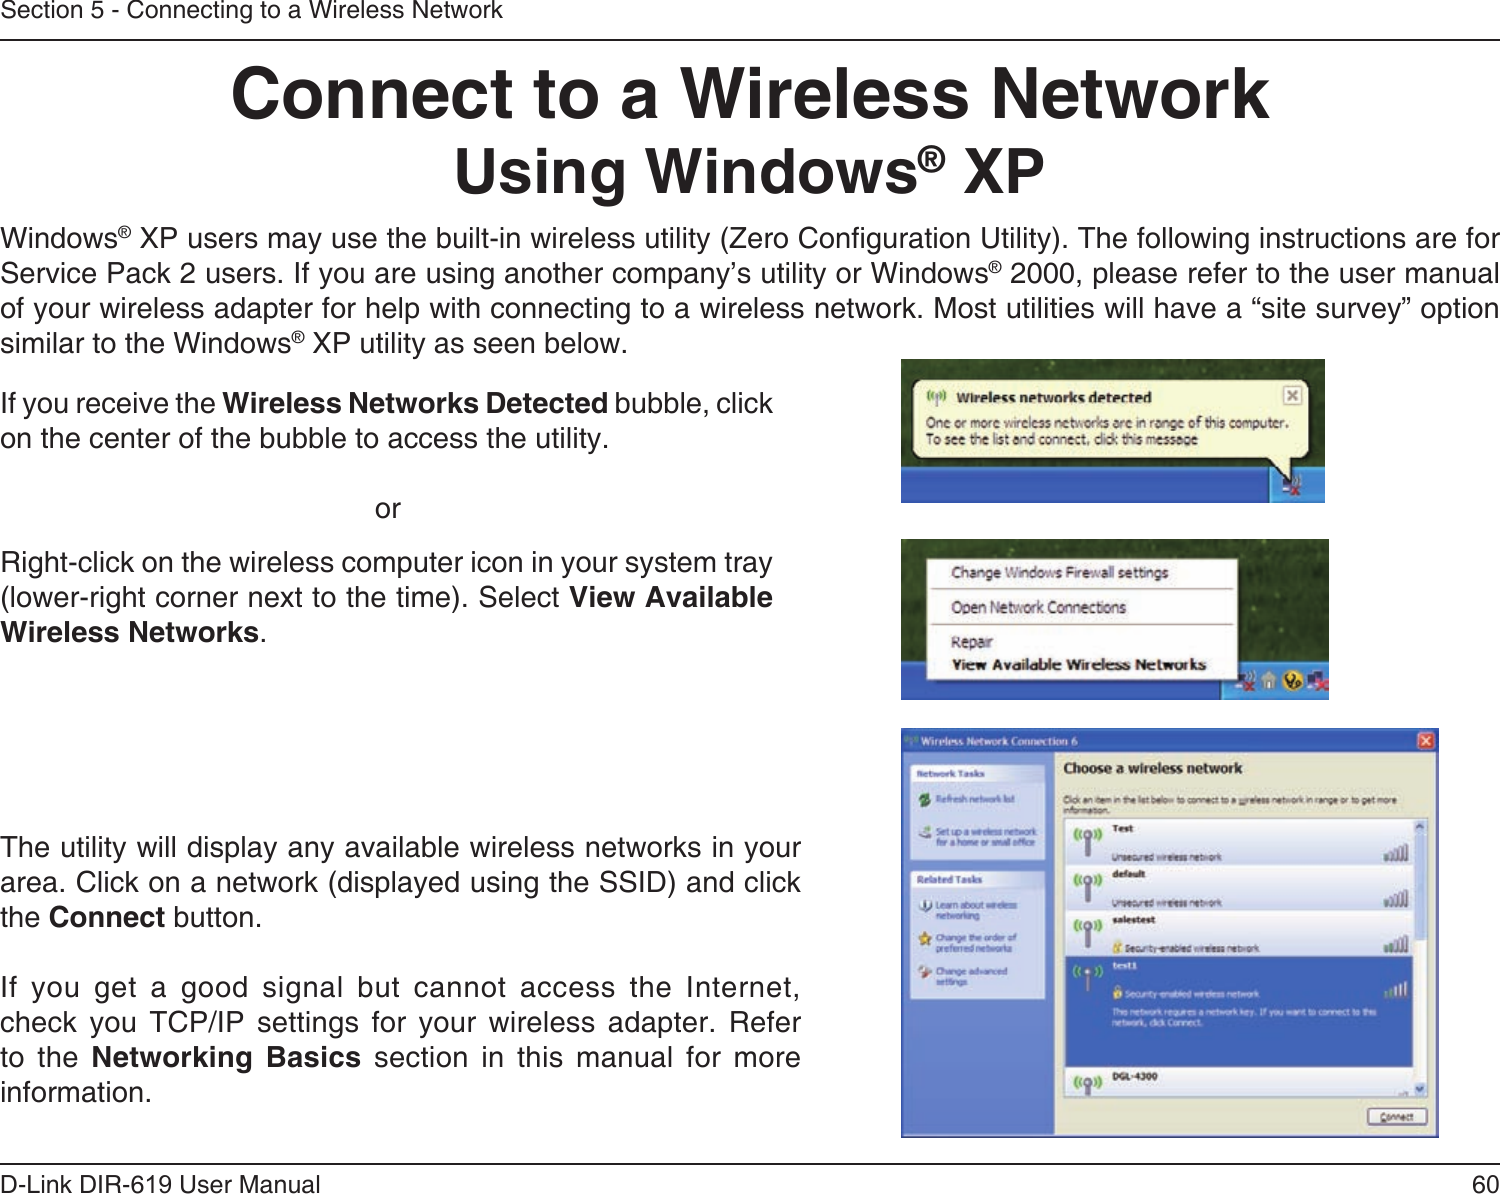 60D-Link DIR-619 User ManualSection 5 - Connecting to a Wireless NetworkConnect to a Wireless NetworkUsing Windows® XPWindows® XP users may use the built-in wireless utility (Zero Conguration Utility). The following instructions are for Service Pack 2 users. If you are using another company’s utility or Windows® 2000, please refer to the user manual of your wireless adapter for help with connecting to a wireless network. Most utilities will have a “site survey” option similar to the Windows® XP utility as seen below.Right-click on the wireless computer icon in your system tray (lower-right corner next to the time). Select View Available Wireless Networks.If you receive the Wireless Networks Detected bubble, click on the center of the bubble to access the utility.     orThe utility will display any available wireless networks in your area. Click on a network (displayed using the SSID) and click the Connect button.If  you  get  a  good  signal  but  cannot  access  the  Internet, check  you  TCP/IP  settings  for  your  wireless  adapter.  Refer to  the  Networking  Basics  section  in  this  manual  for  more information.